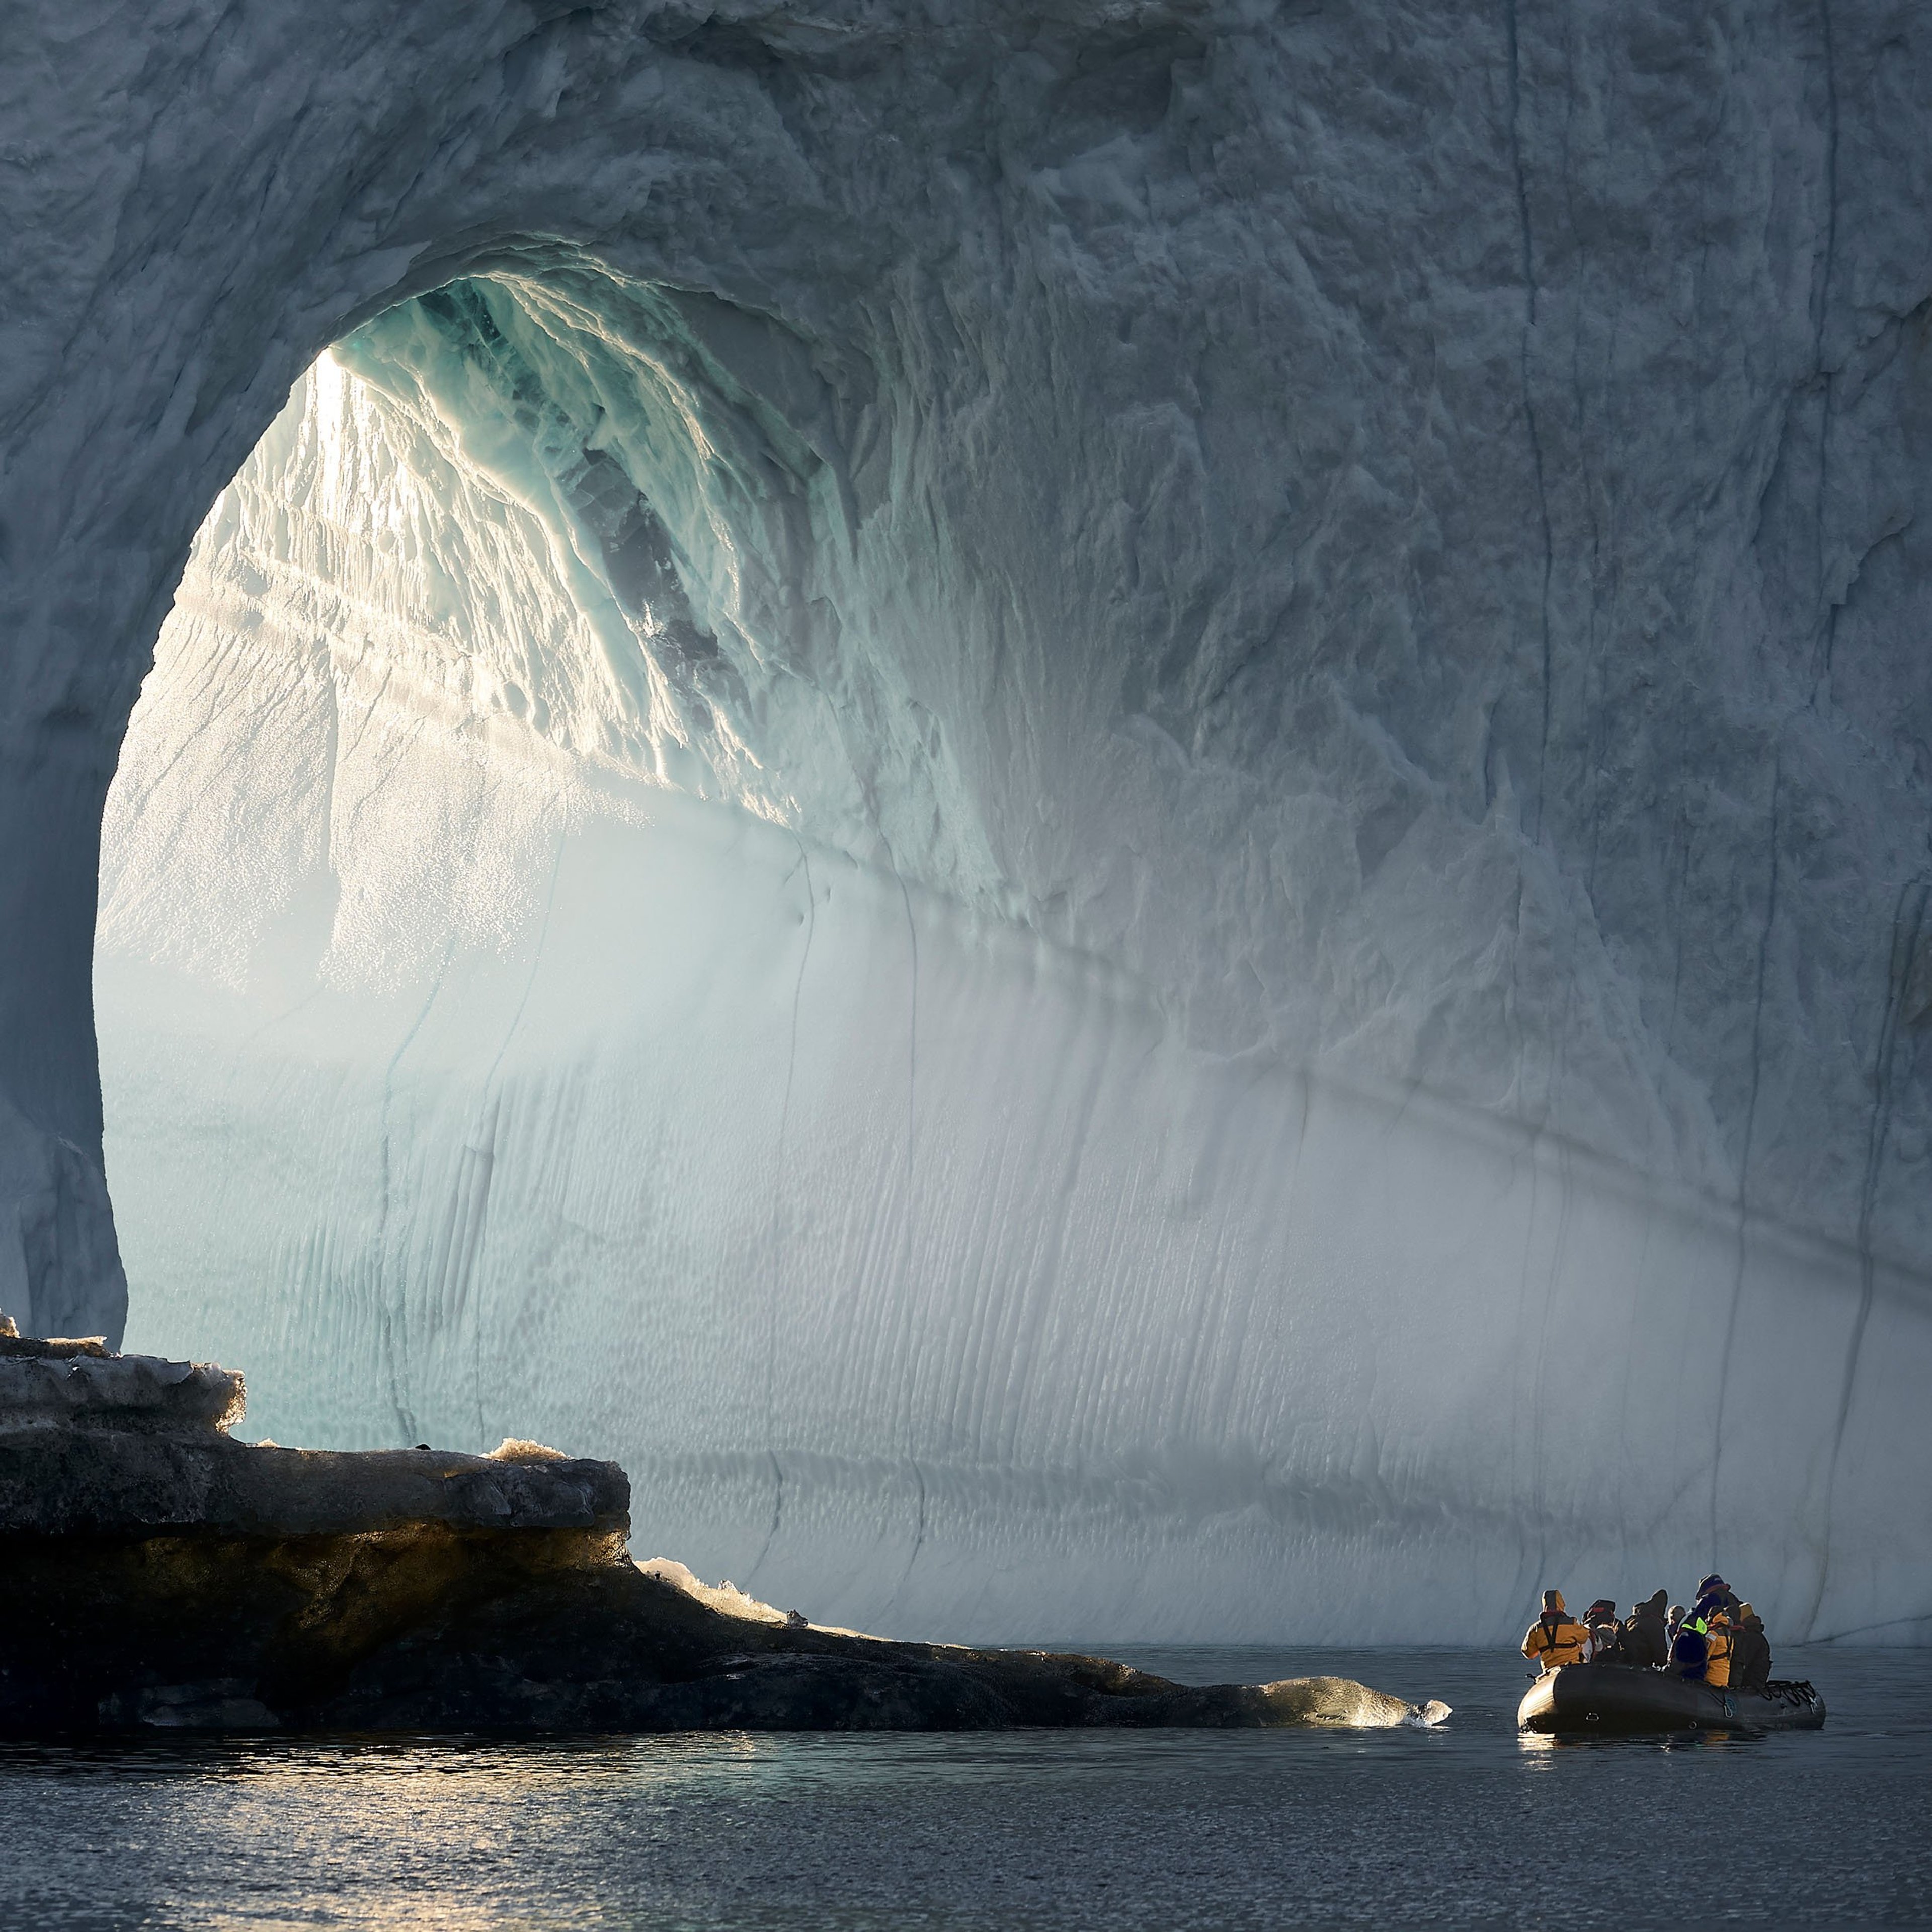 A rubber dinghy inside a large ice cave in Greenland.